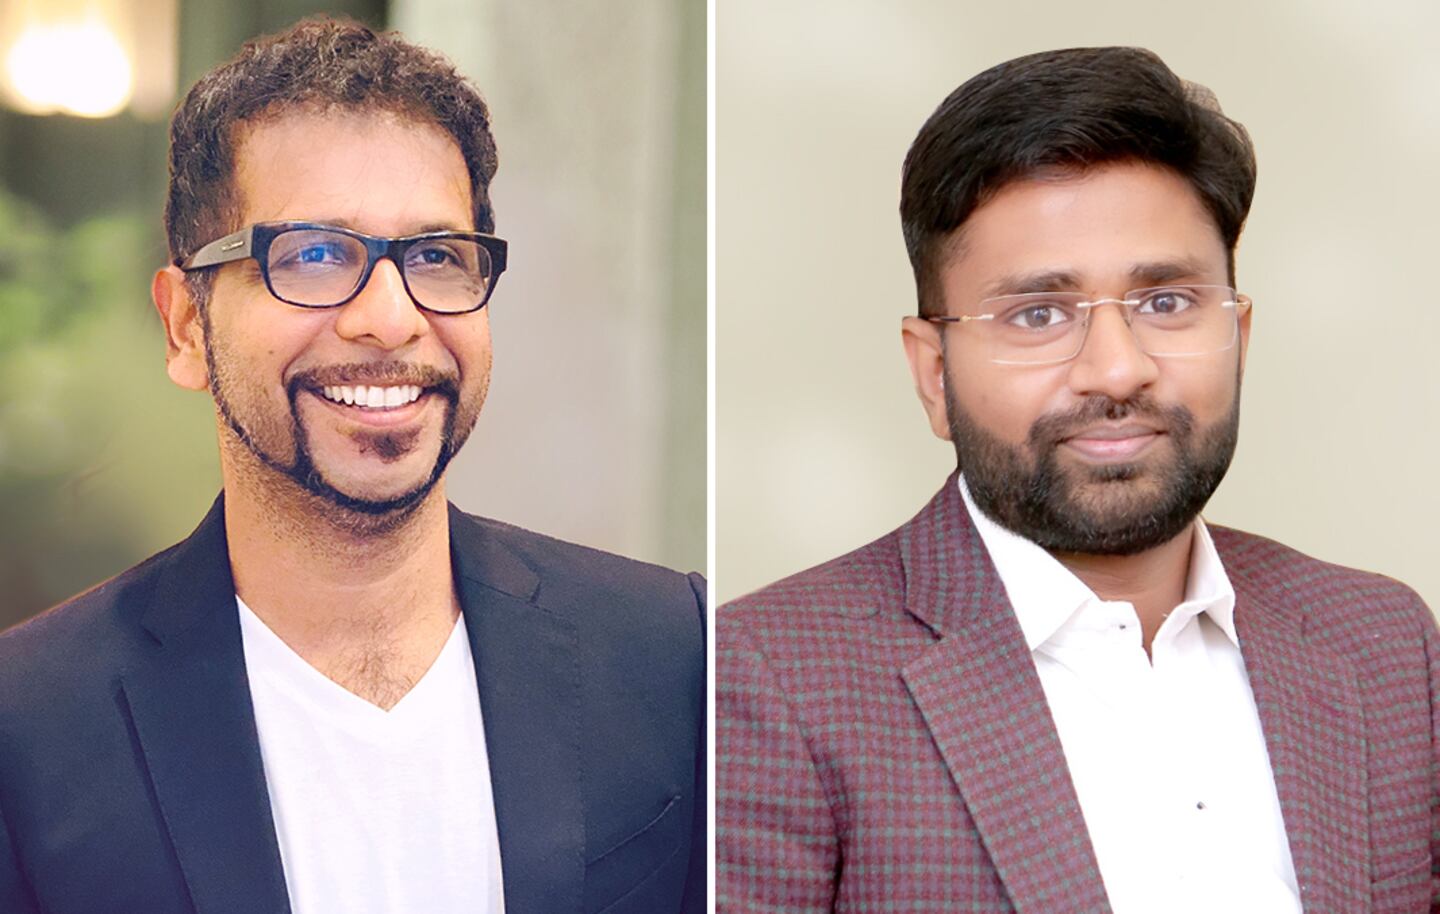 Darpan Sanghvi, founder and group CEO of Good Glamm Group (left) and Rahul Agarwal, Organic Harvest founder and CEO (right).